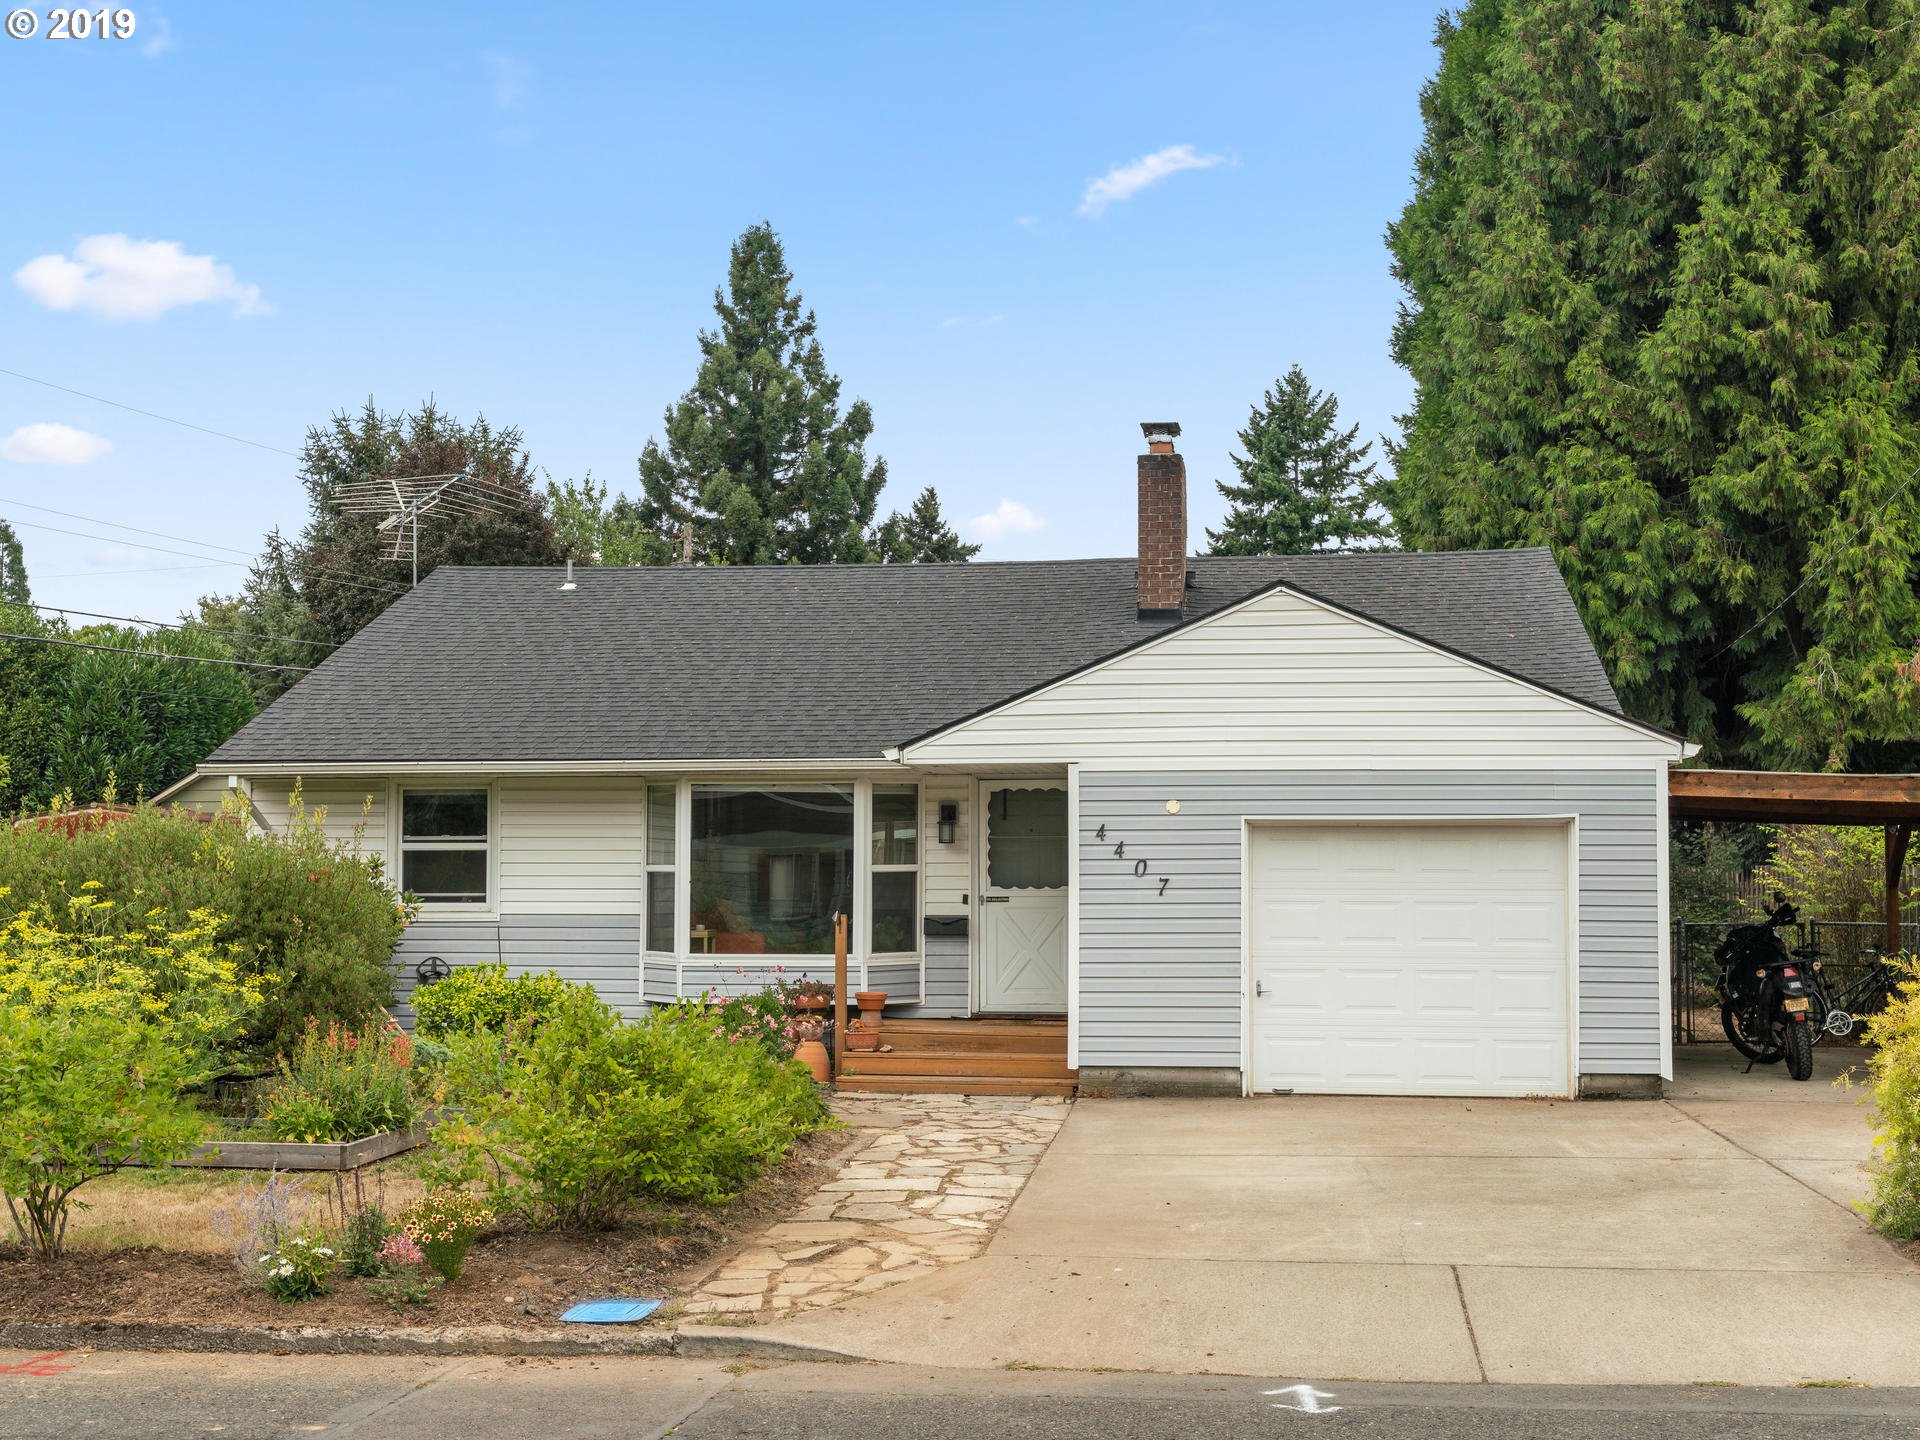 Happily Ever After in a Milwaukie Mid-Century